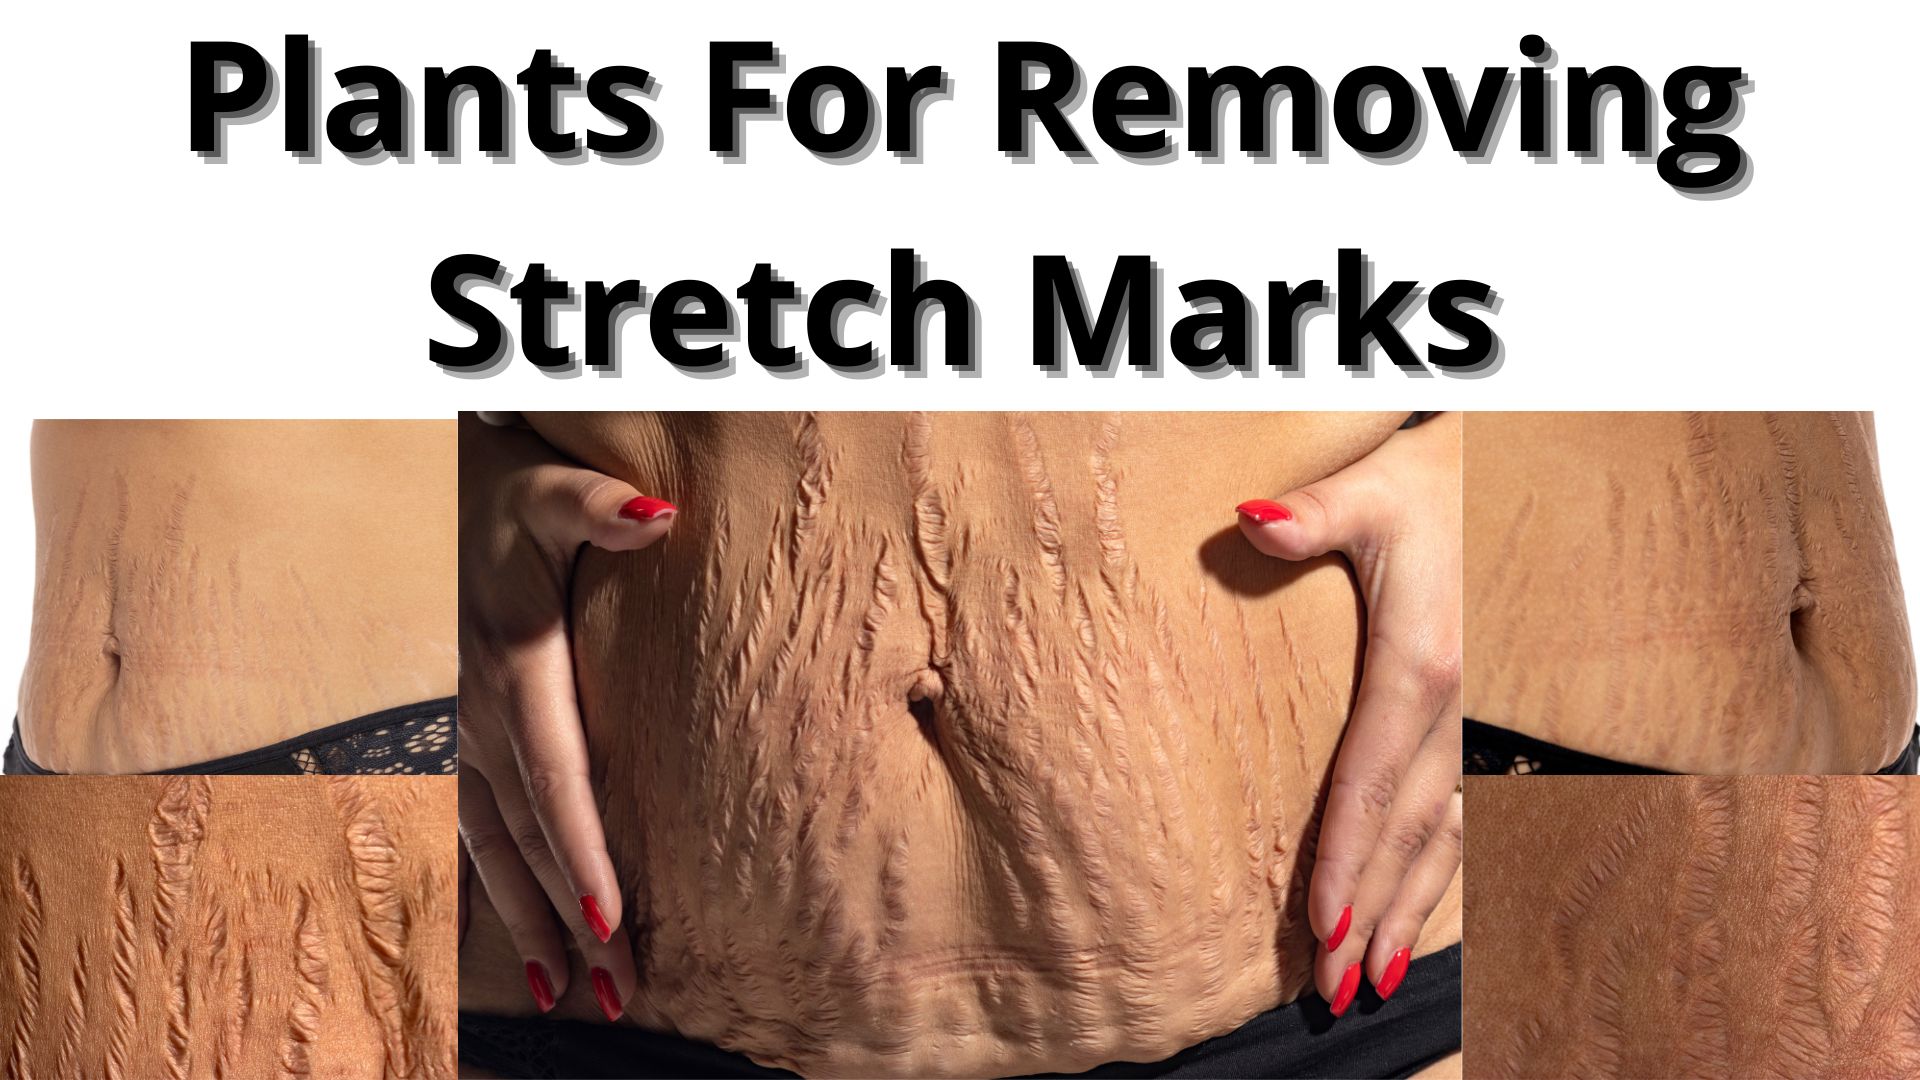 Plants For Removing Stretch Marks